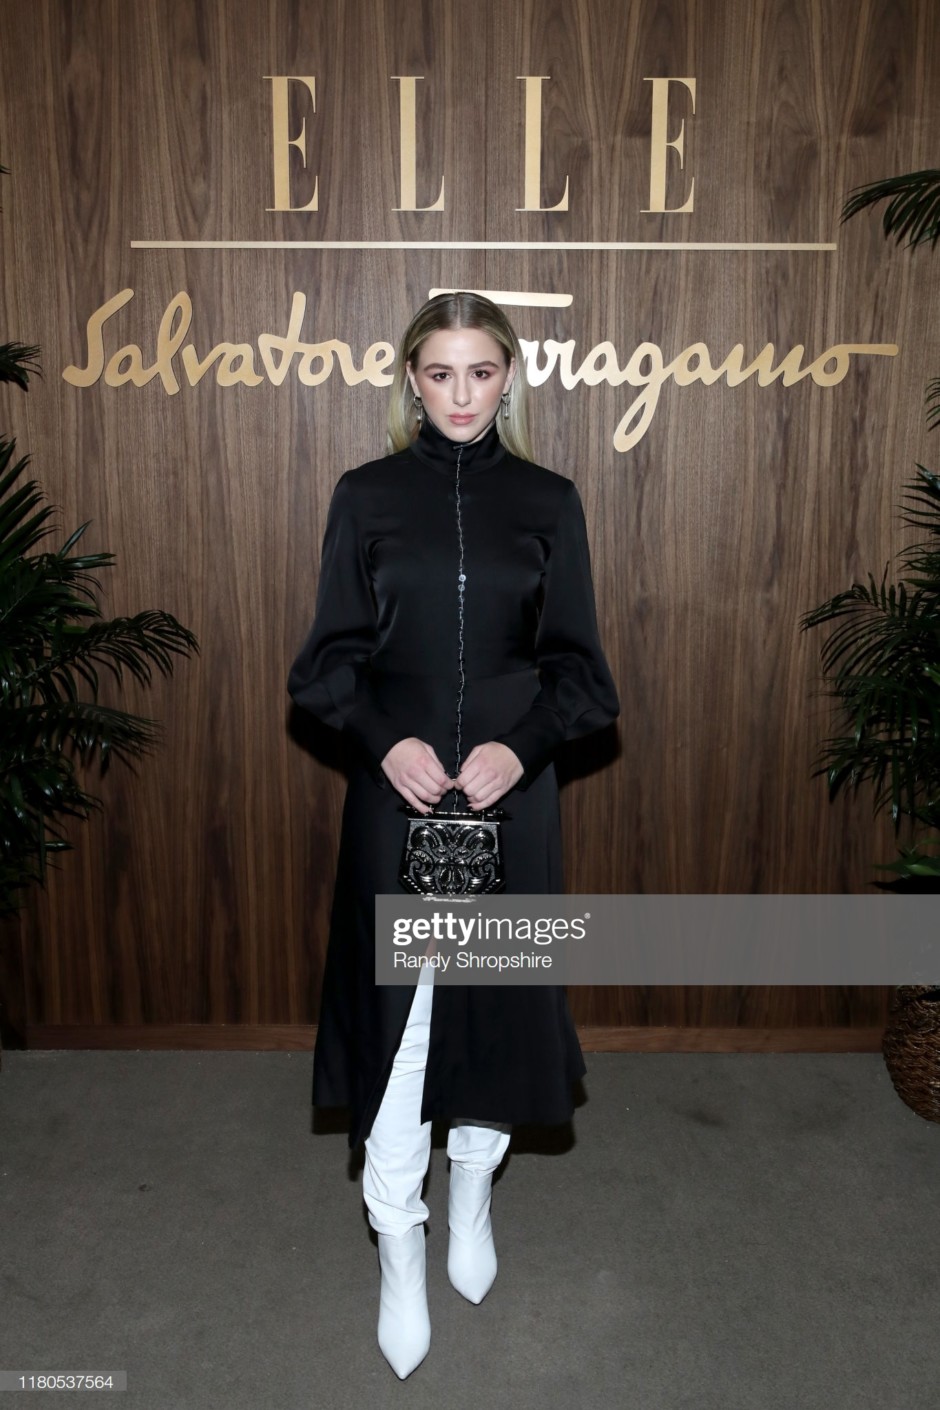 gettyimages-1180537564-2048x2048